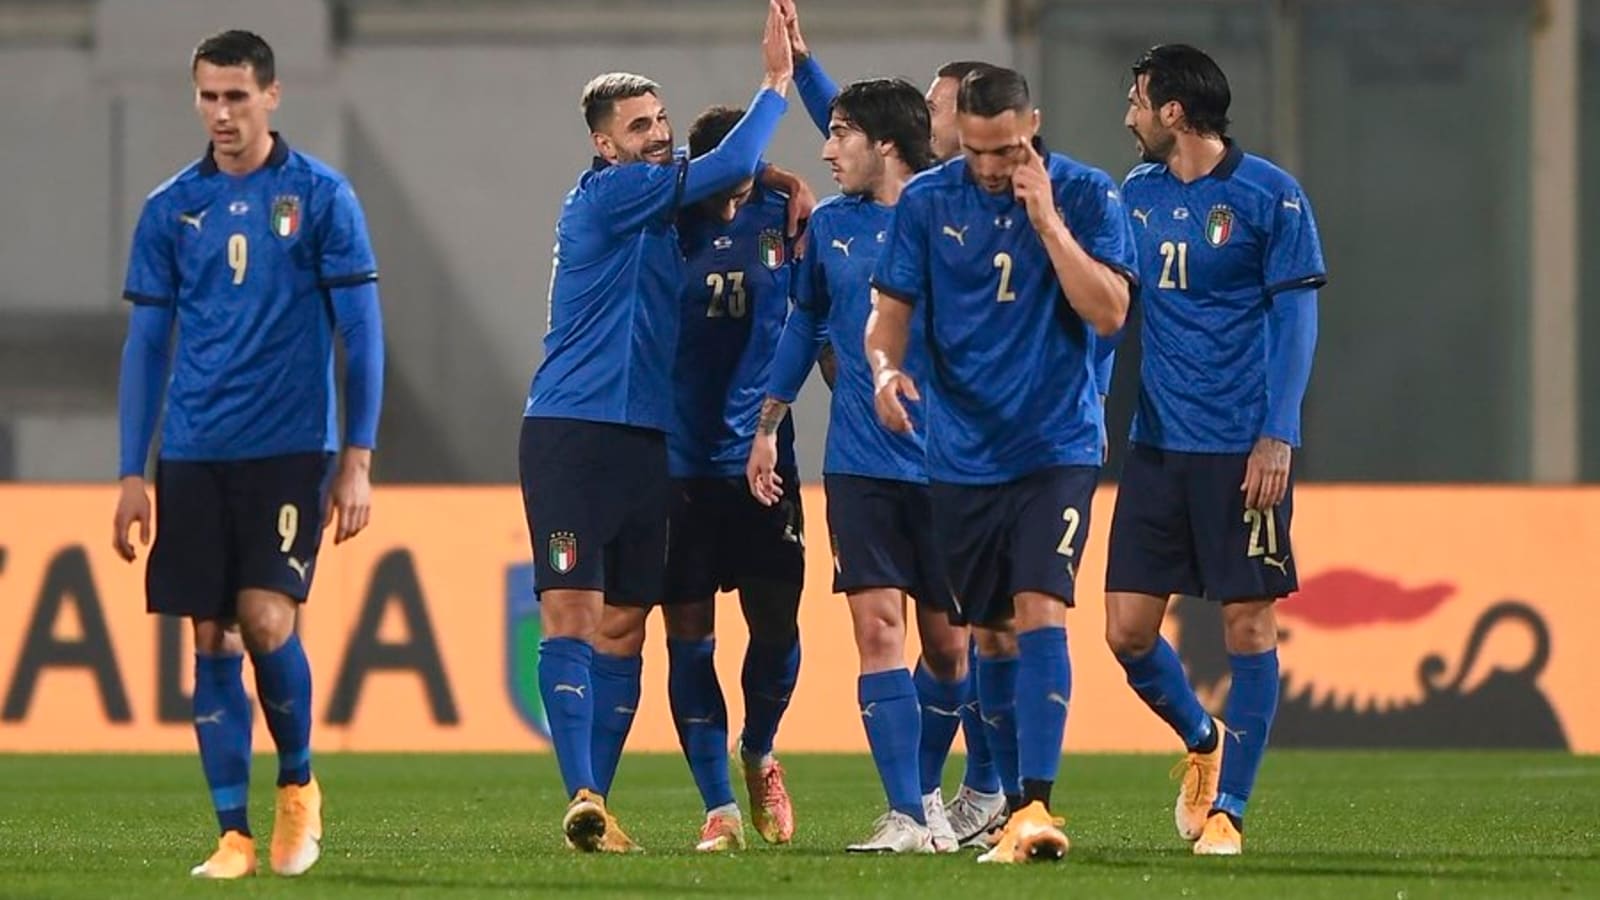 EURO 2020: Italy transformed after World Cup failure